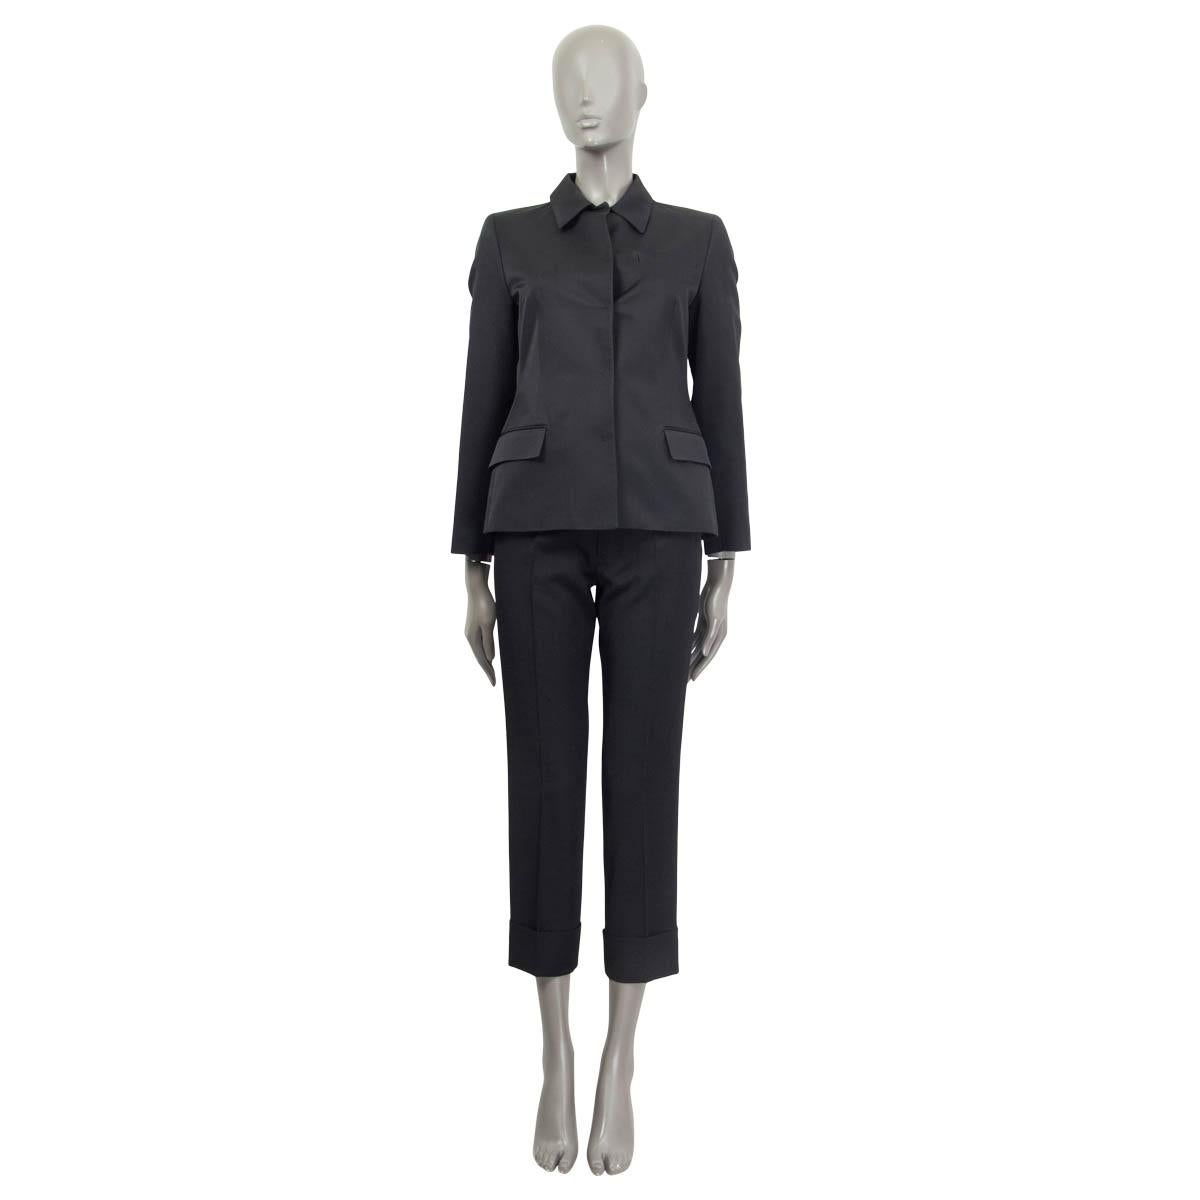 100% authentic Prada classic blazer in black wool (52%) and silk (48%). Features two flap pockets on the front. Opens with five push buttons on the front. Lined in black rayon (100%). Has been worn and is in excellent condition.

Measurements
Tag